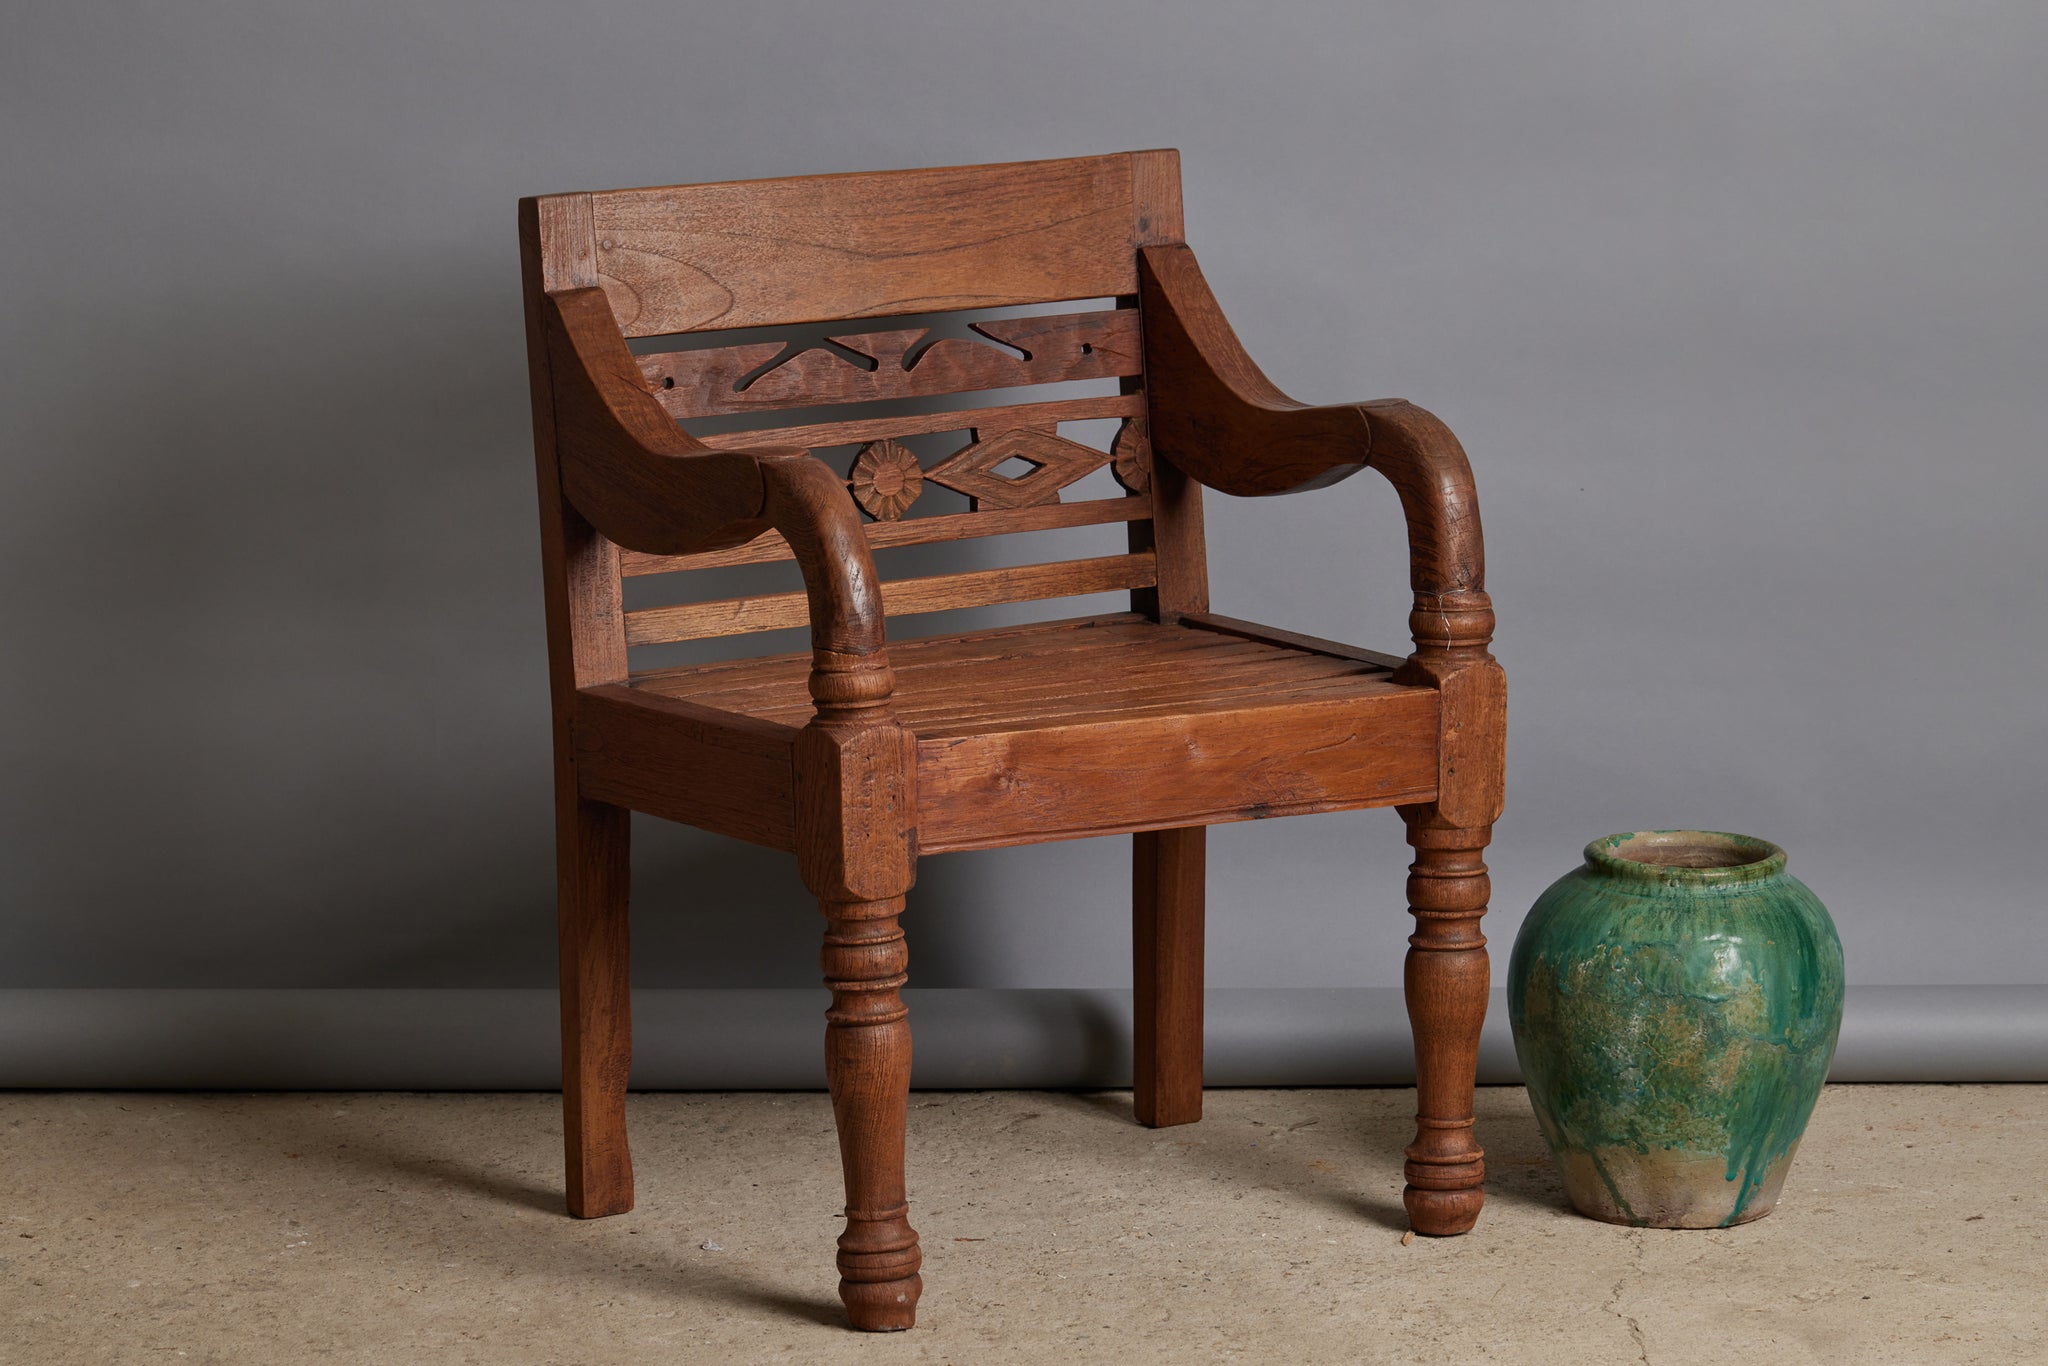 Dutch Colonial Teak Raffles Chair with Slatted Seat & Heavy Arms & Legs from Java